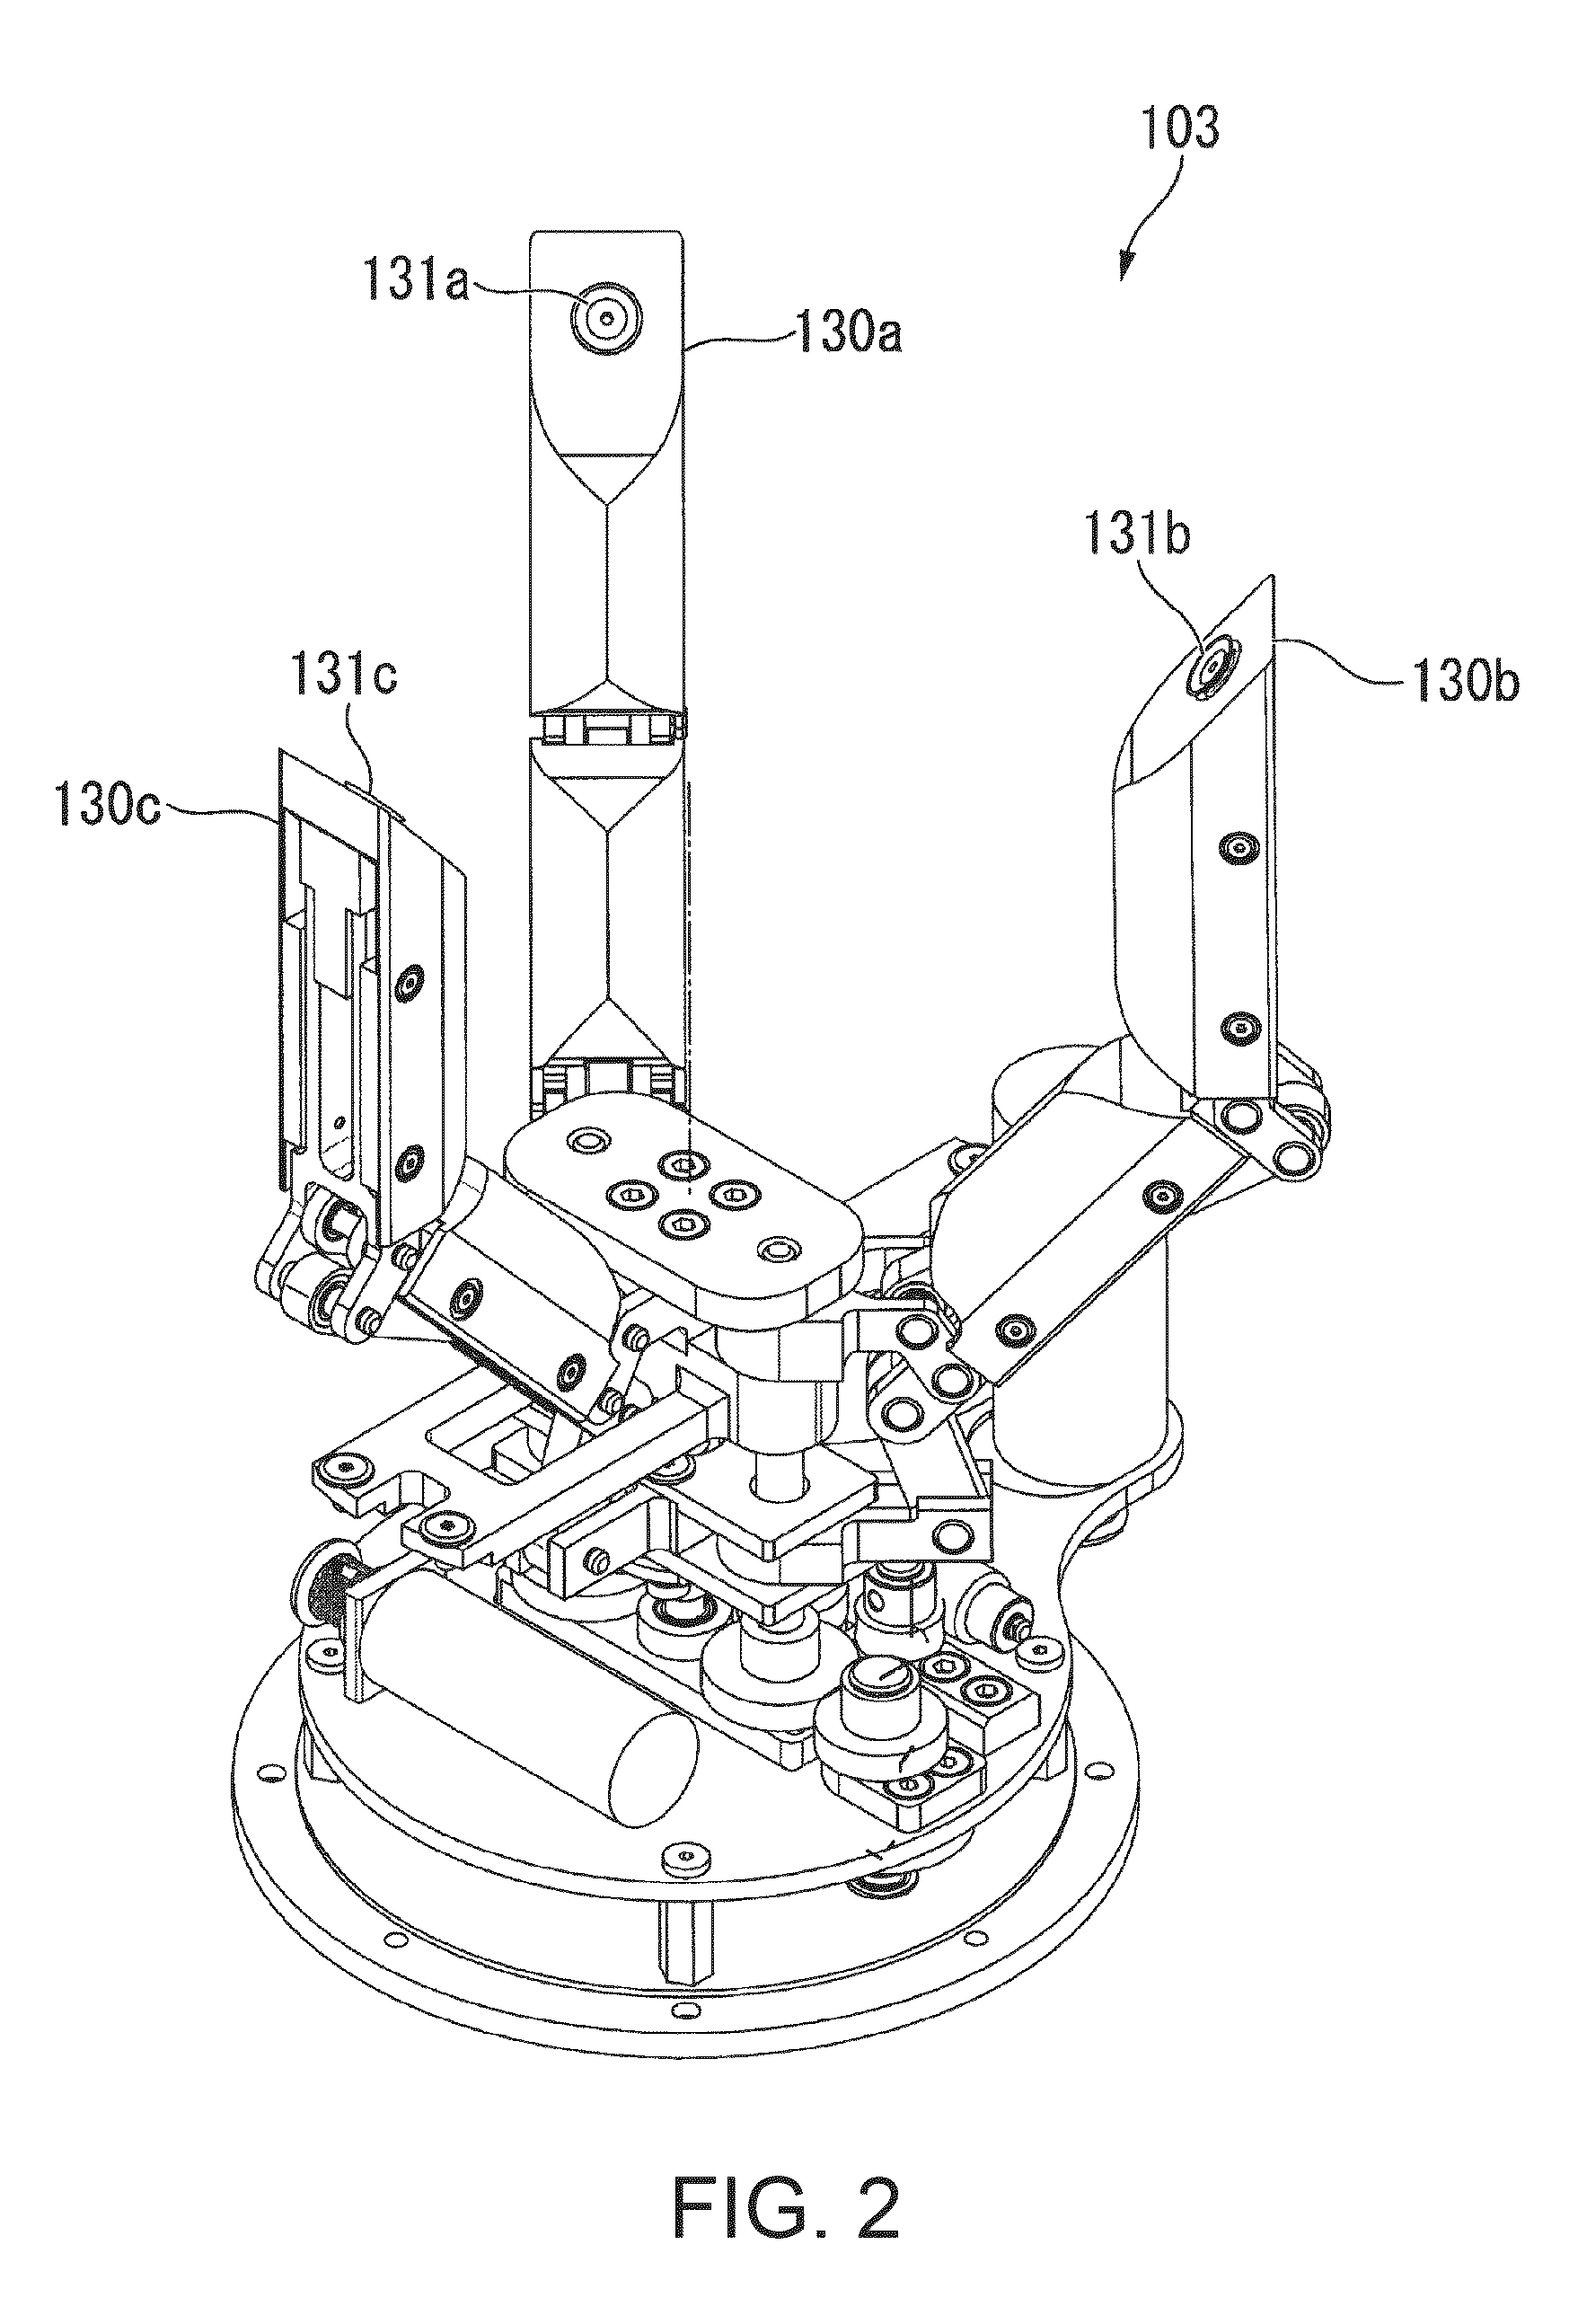 Robot control method, robot control device, robot, and robot system